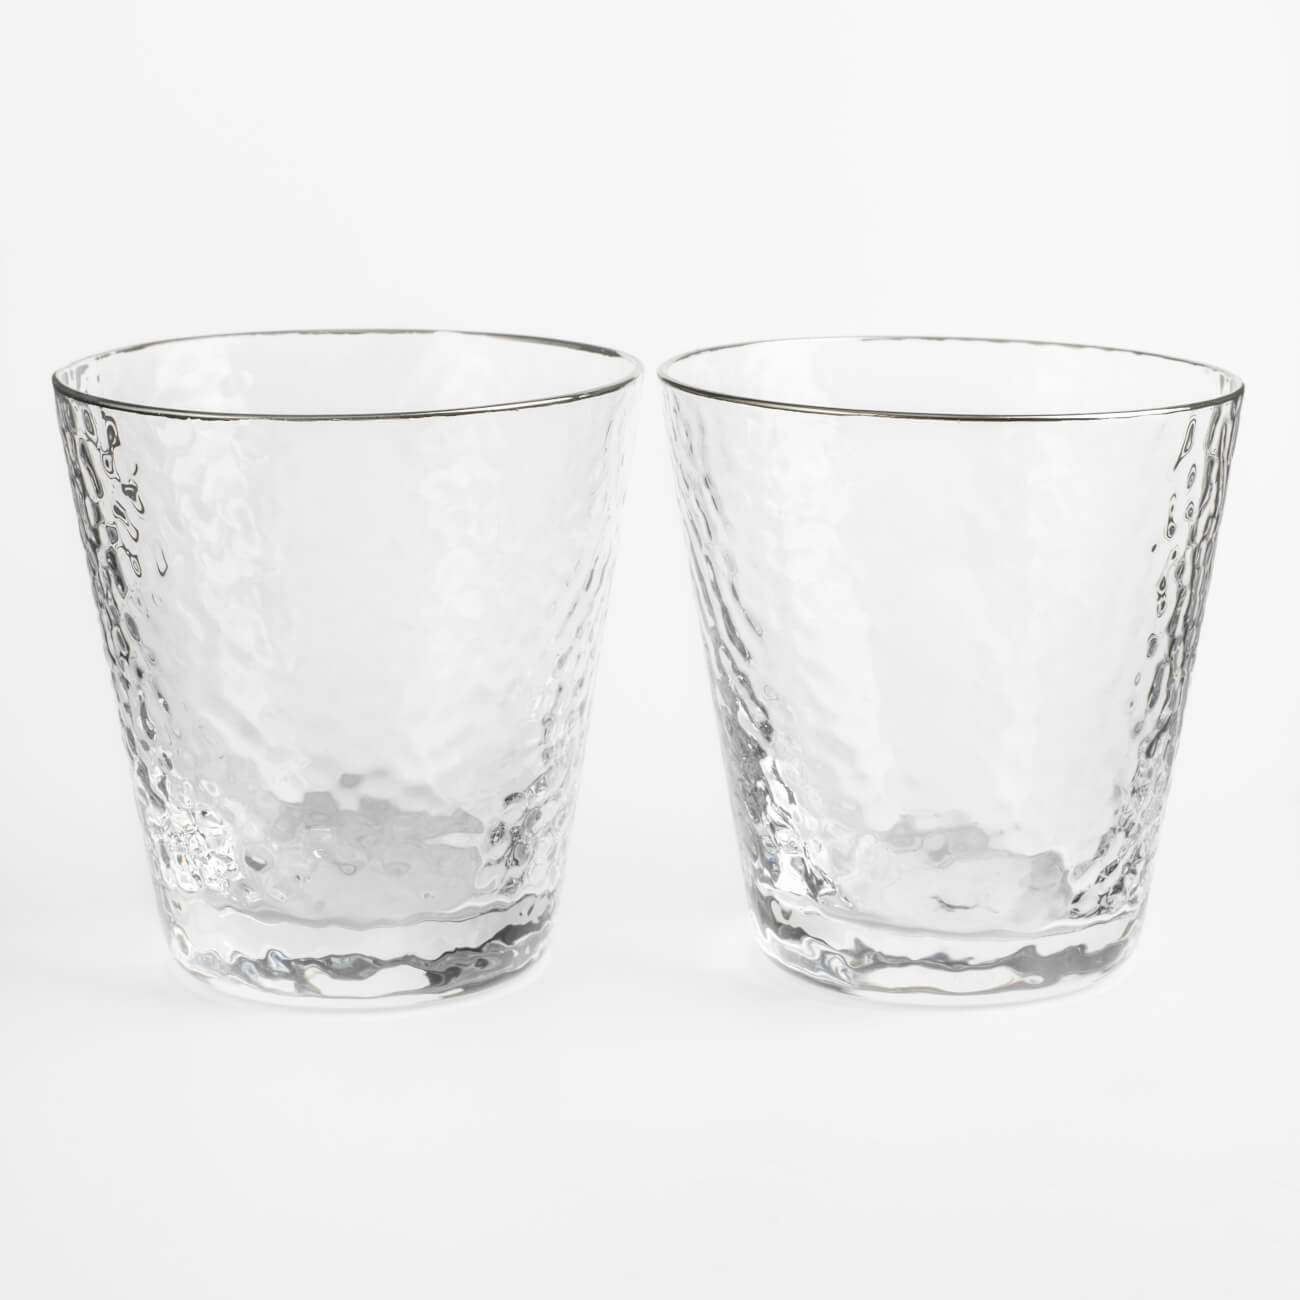 Whiskey glass, 270 ml, 2 pcs, glass, with silver edging, Ripply silver изображение № 1